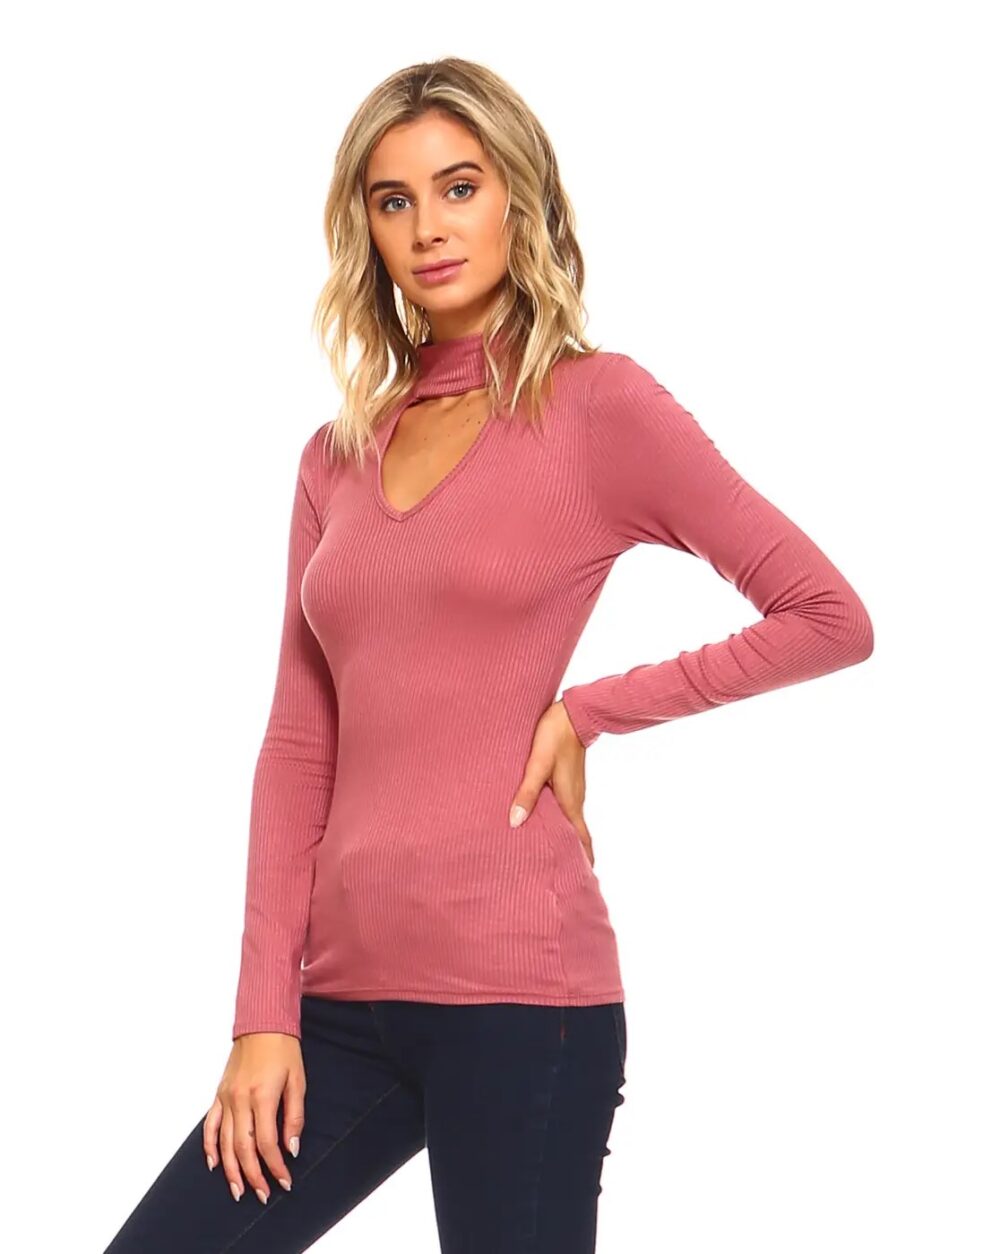 Marsala Soft Ribbed Knit Top with Choker Neckline Made in USA